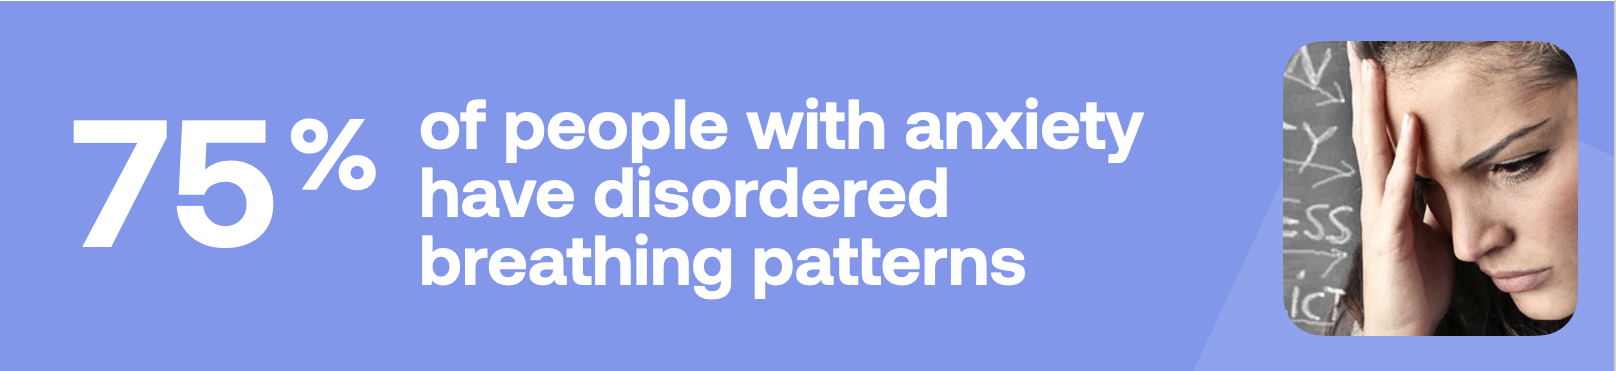 75% of people with anxiety have disordered breathing patterns